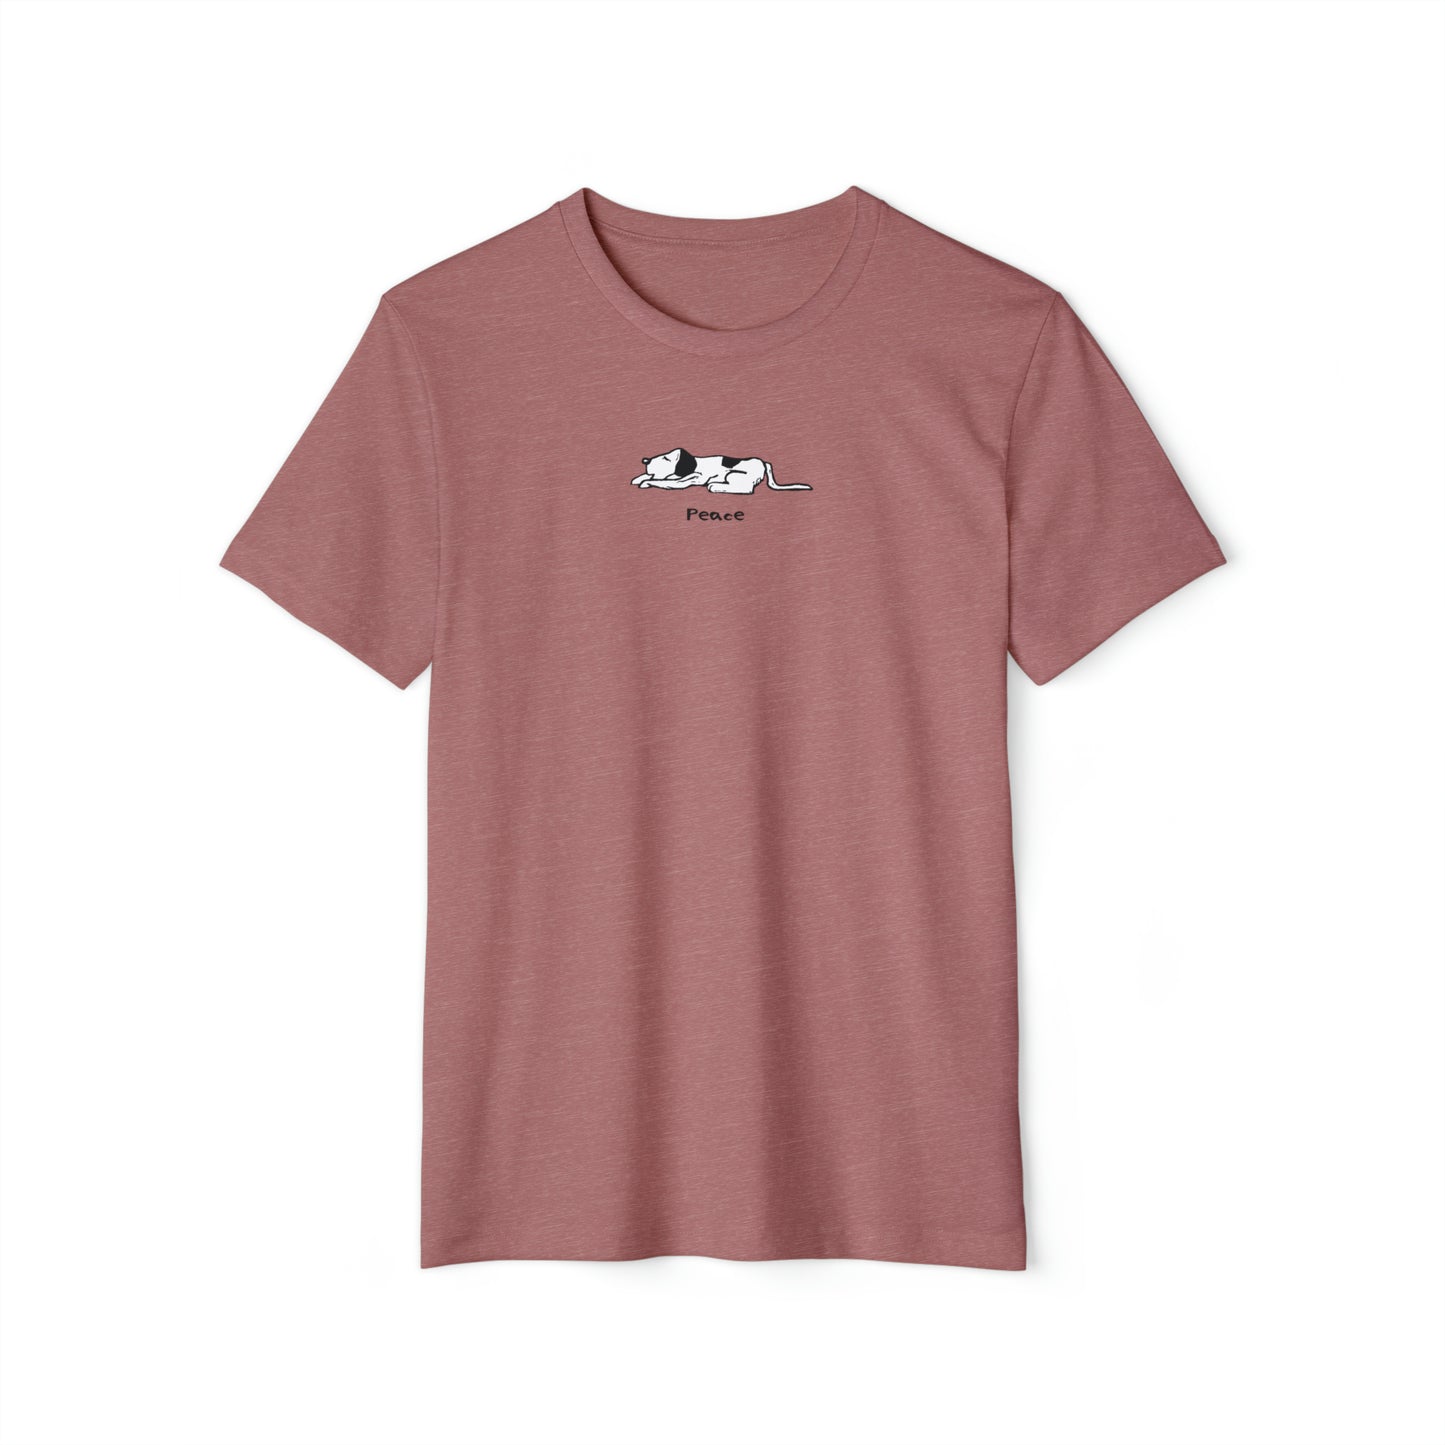 Black and white lying down sleeping dog on heather mauve red color unisex men's t-shirt. Text under image says Peace.